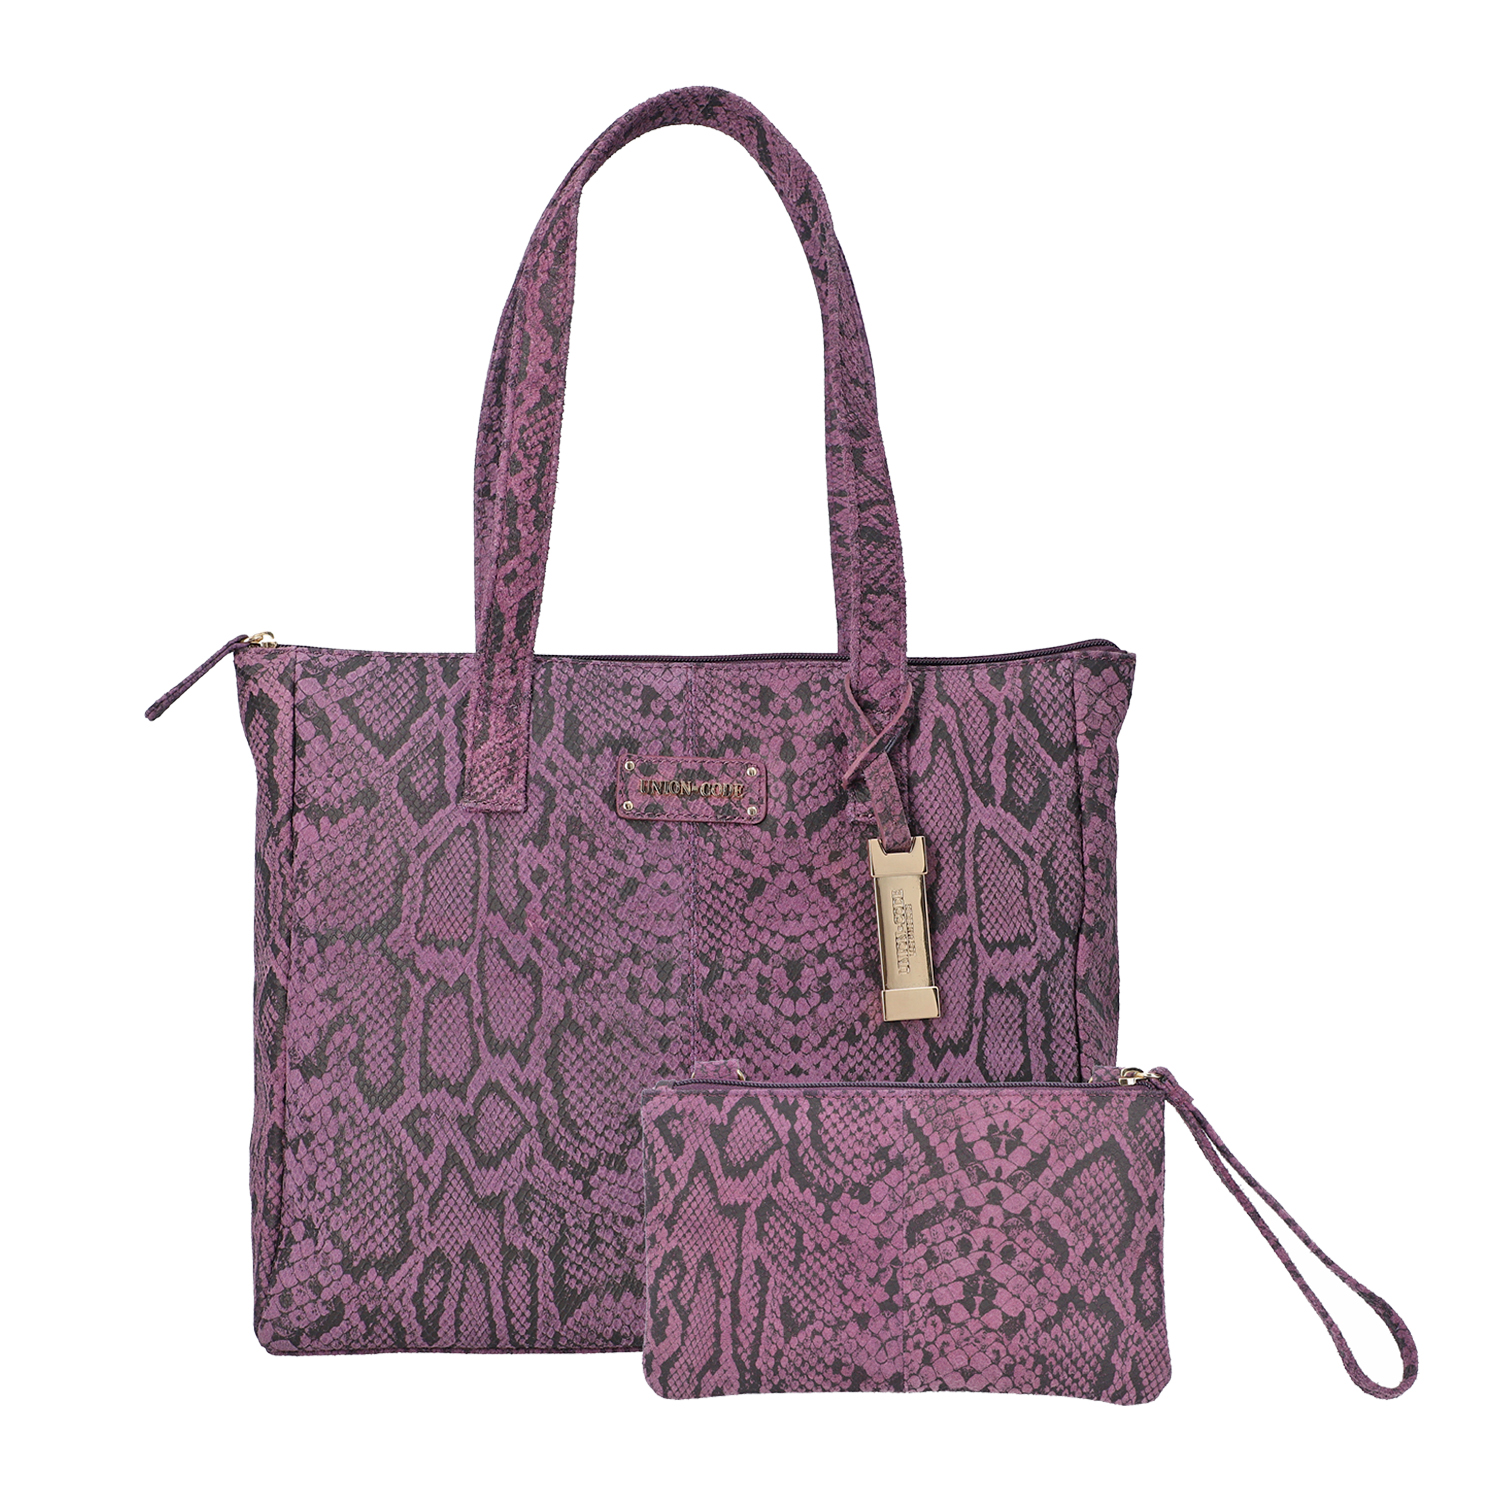 Union Code 100% Genuine Leather Plum Snake-Skin Pattern Tote Bag and RFID Wristlet/Clutch Bag